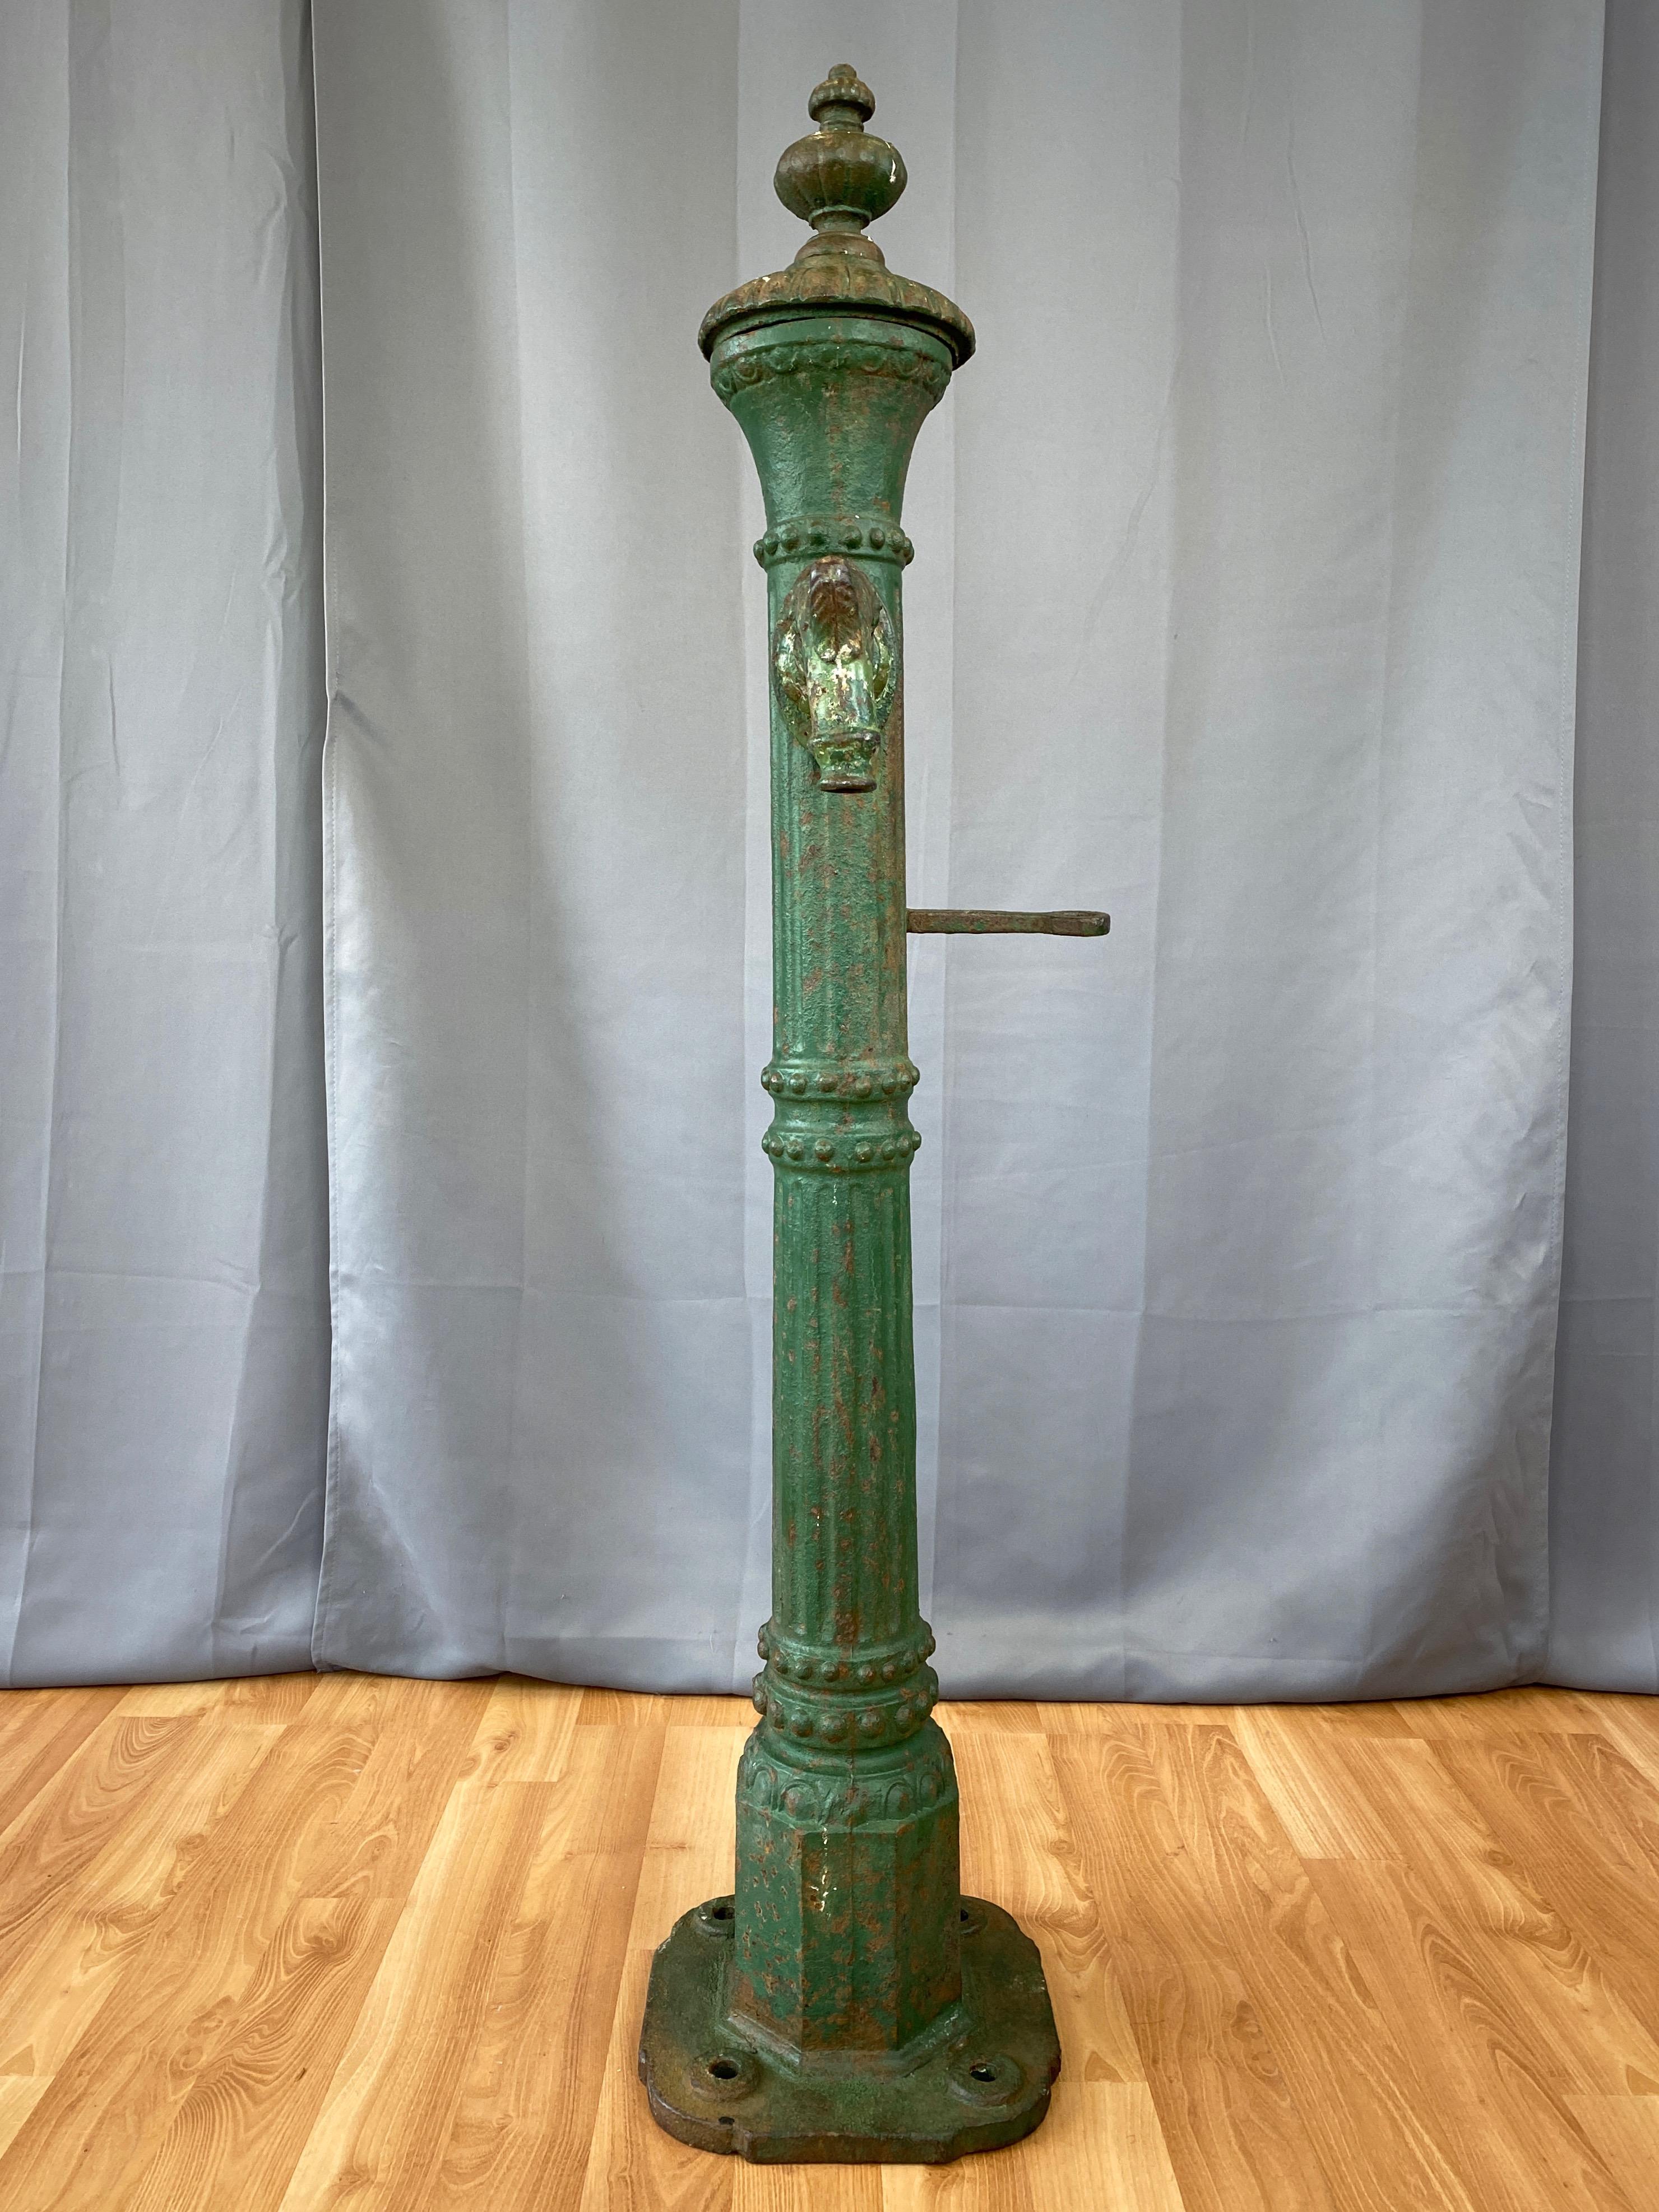 American Classical Antique Tall Green Cast Iron Water Fountain from San Francisco, c. 1860